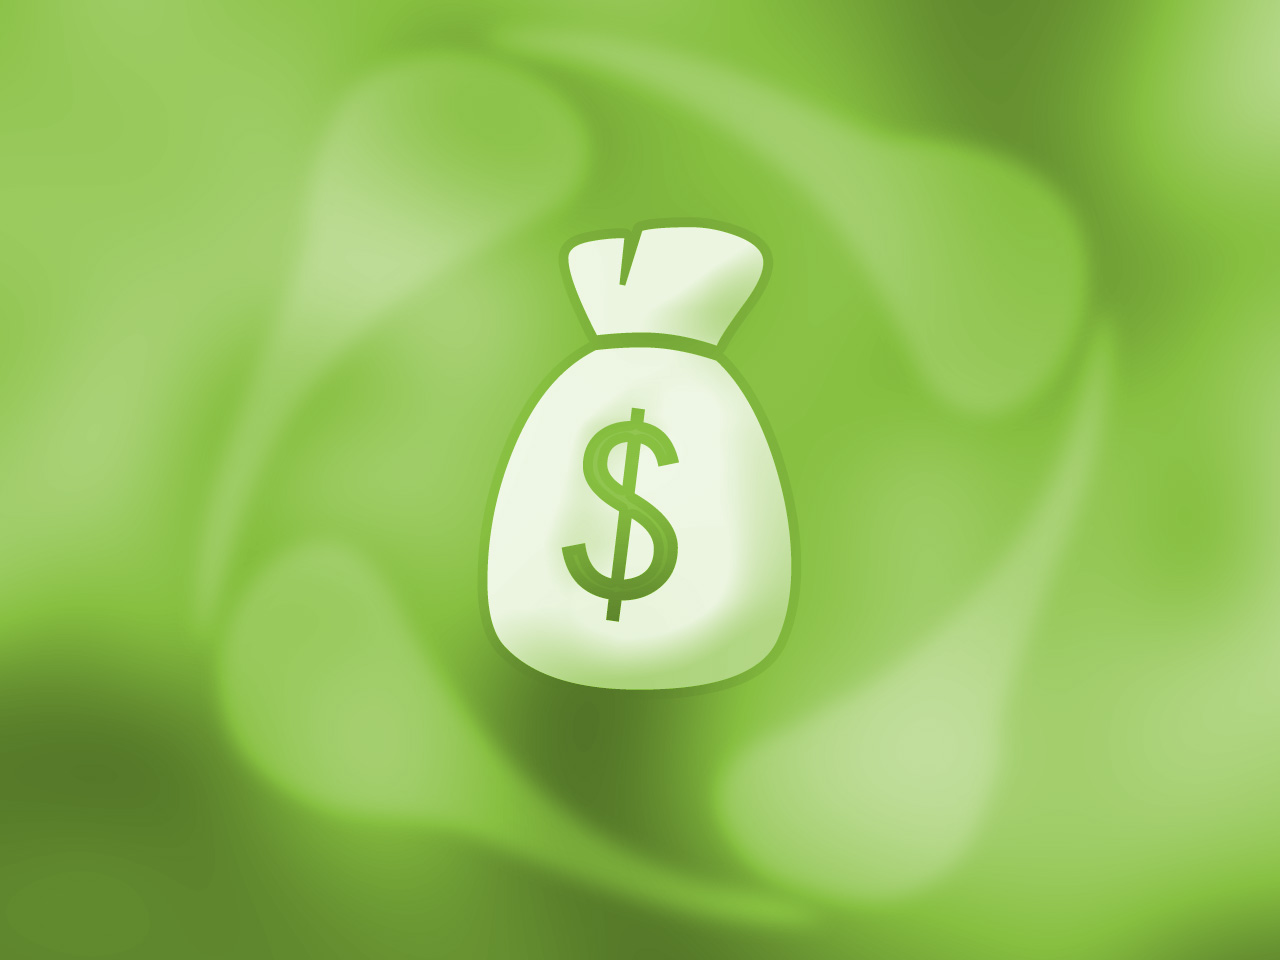 Moneybag with dollar sign on green background